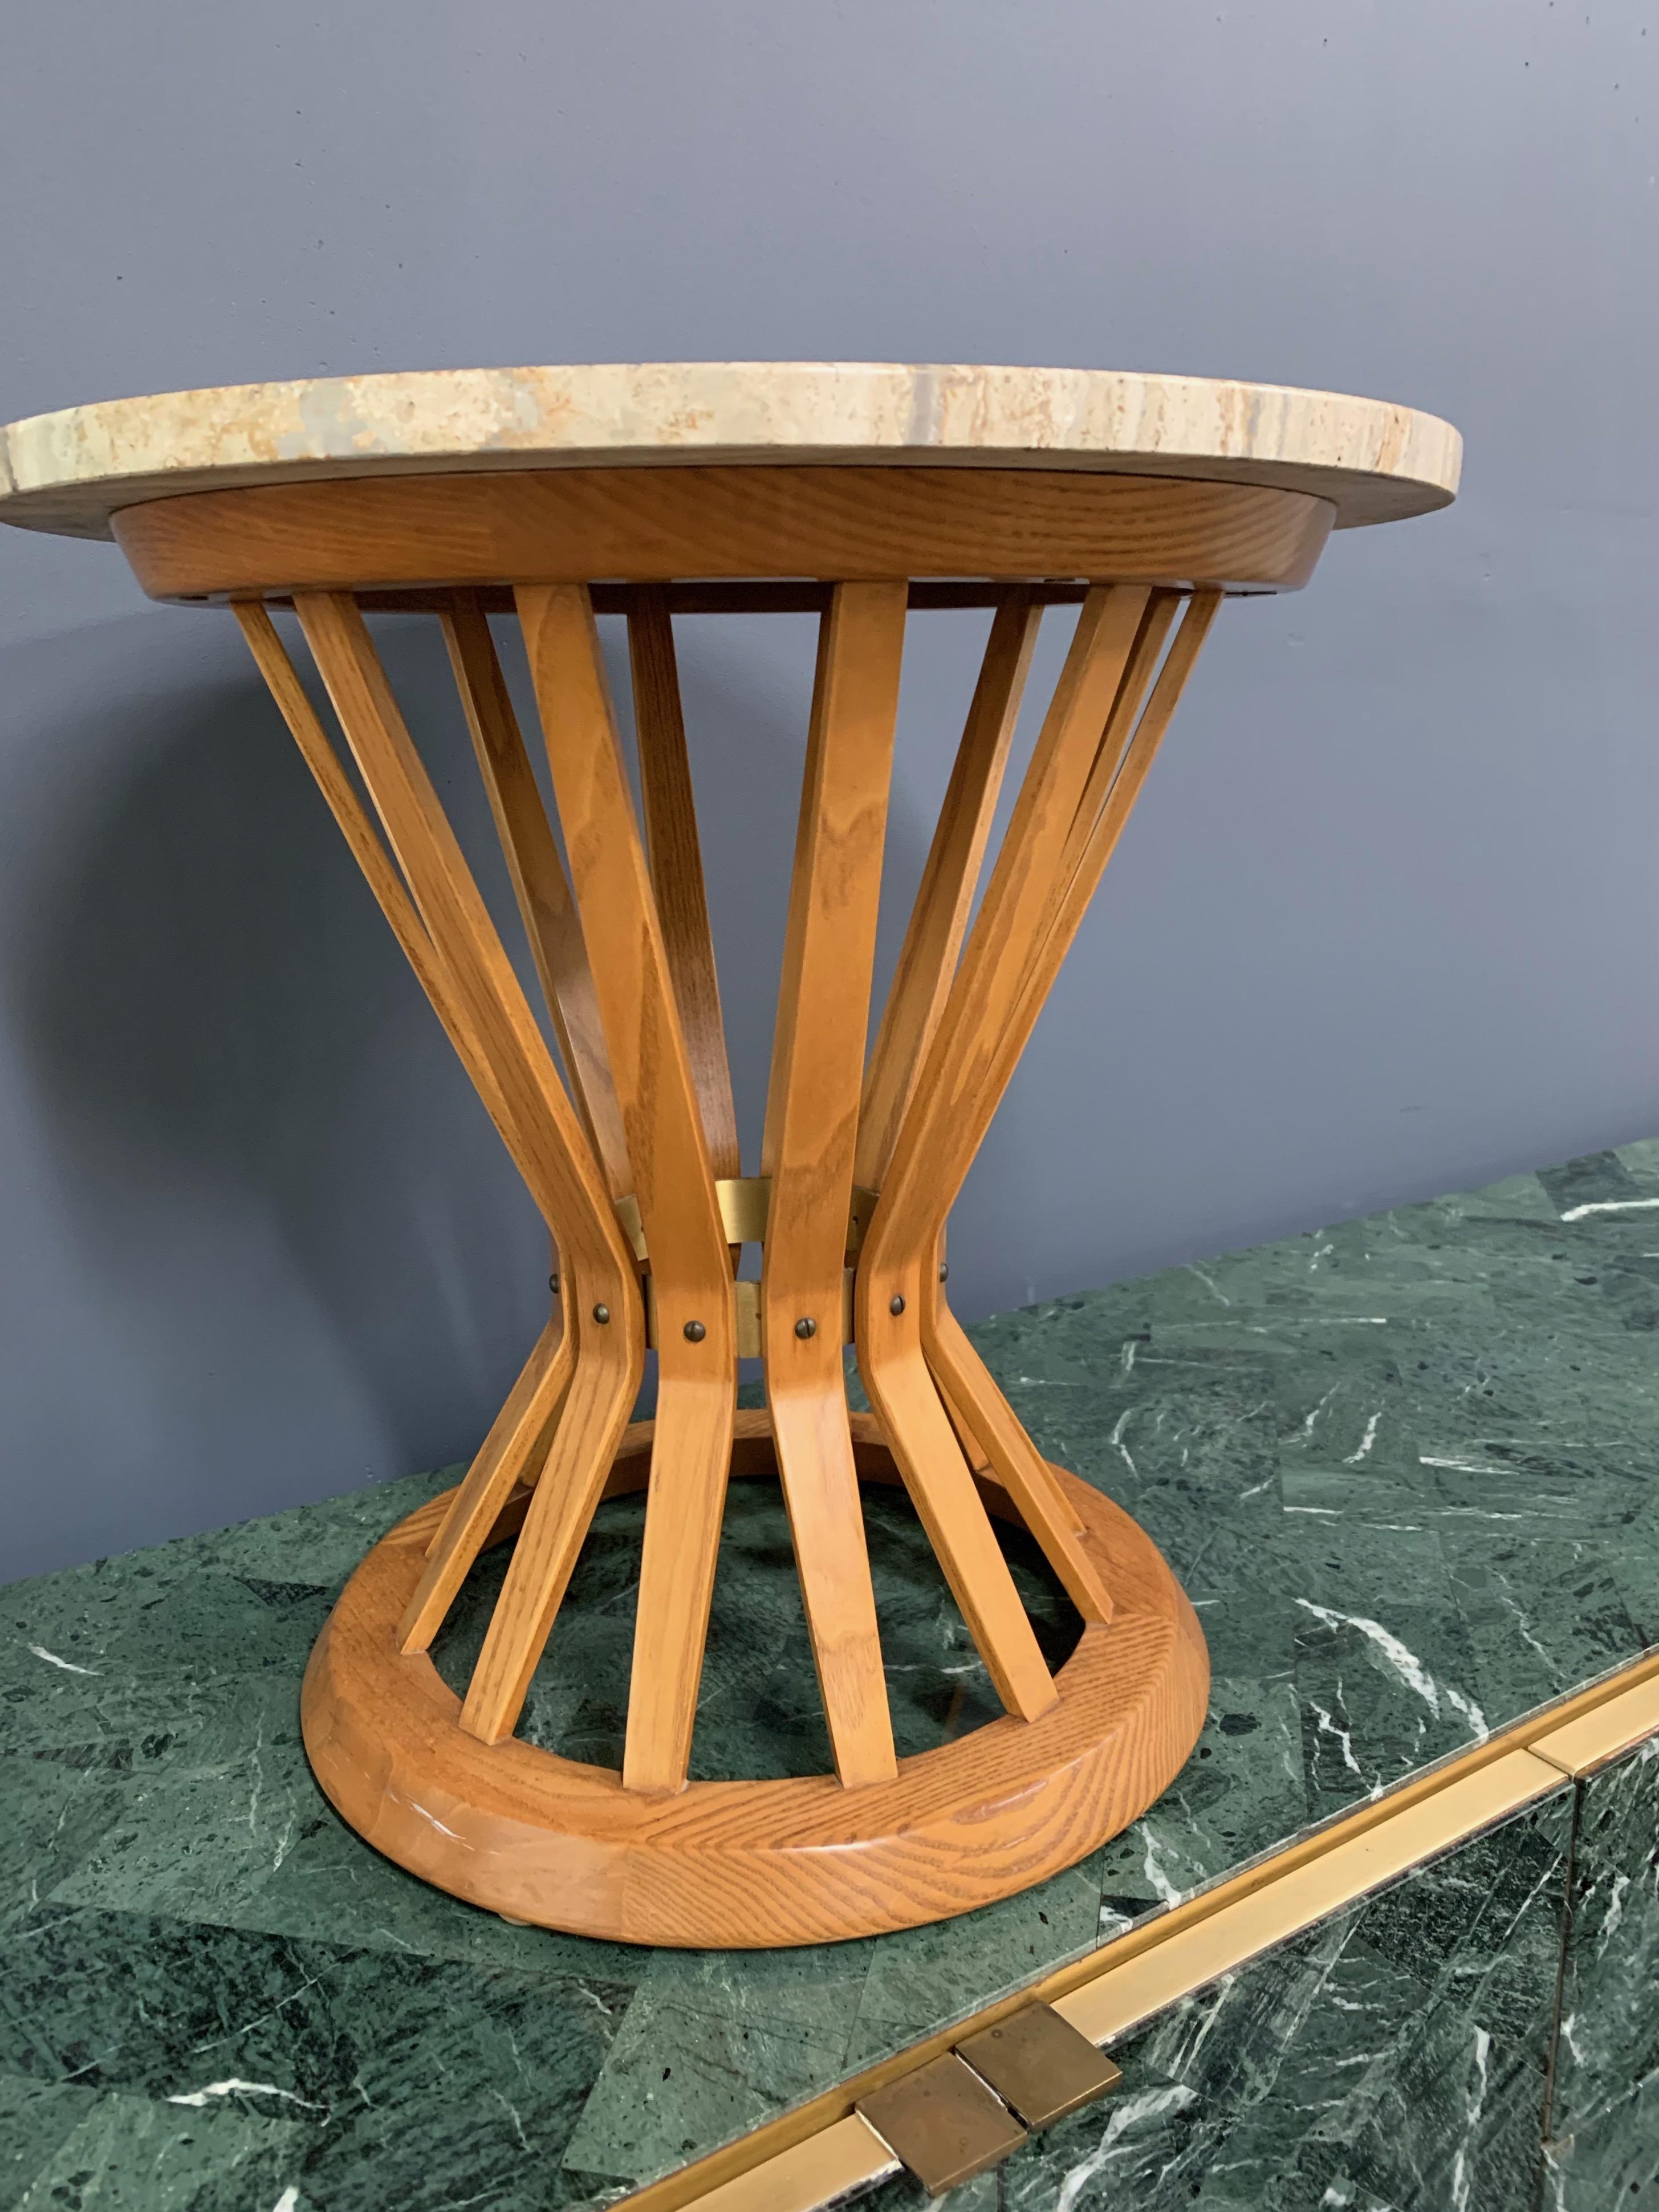 All original table in warm oak and travertine top by Dunbar Furniture Co. This is an iconic design from the 1950s. This table is in all original condition and very handsome.

This piece is from that extraordinary period when Harvey Probber, Vladimir